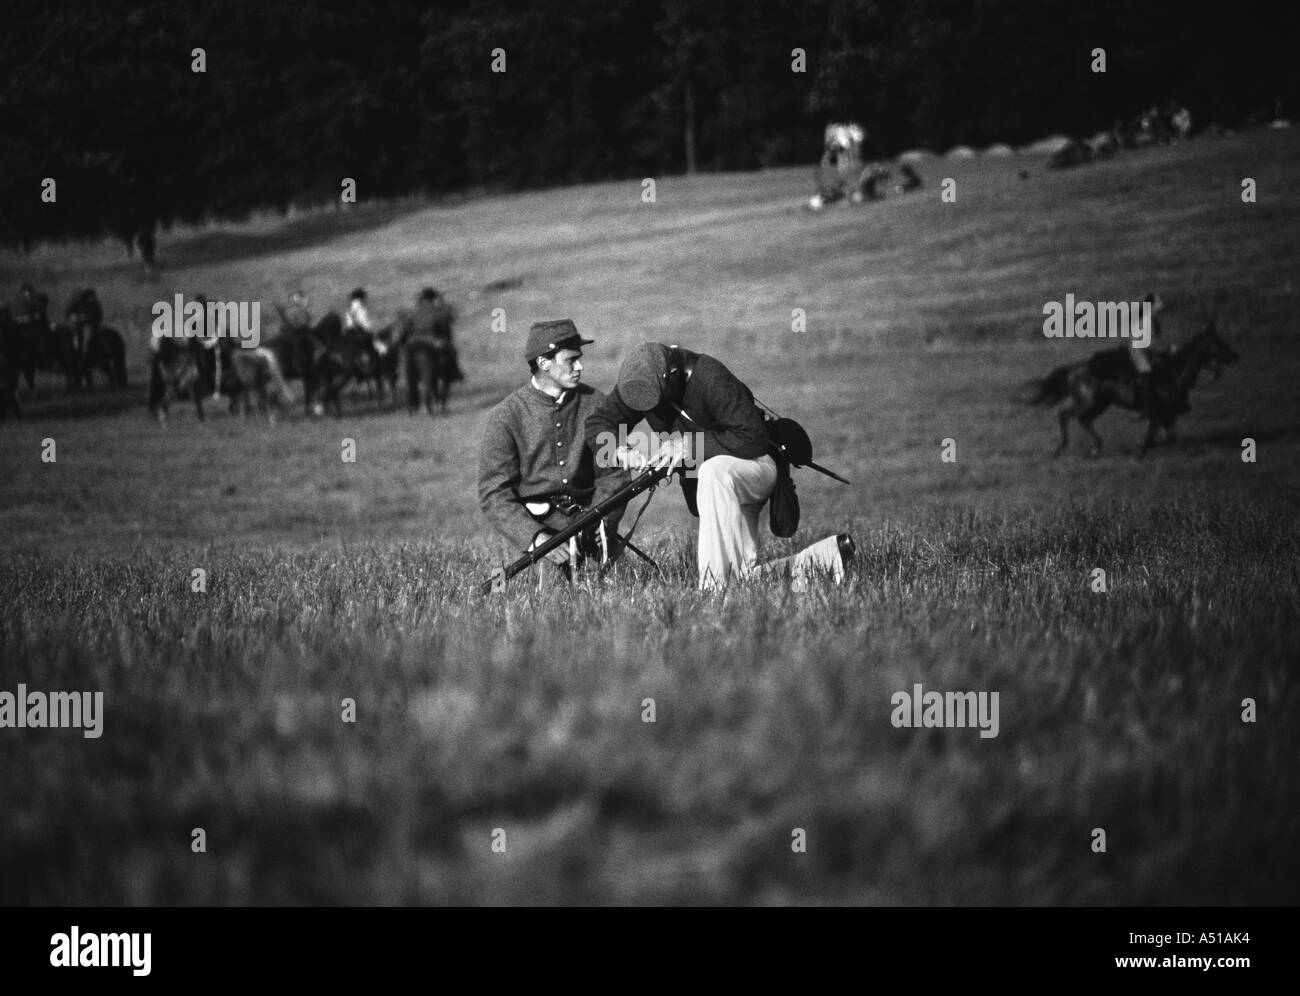 Black and white photo of our union army soldier with a wounded comrade during the Battle of Gettysburg reenactment Stock Photo